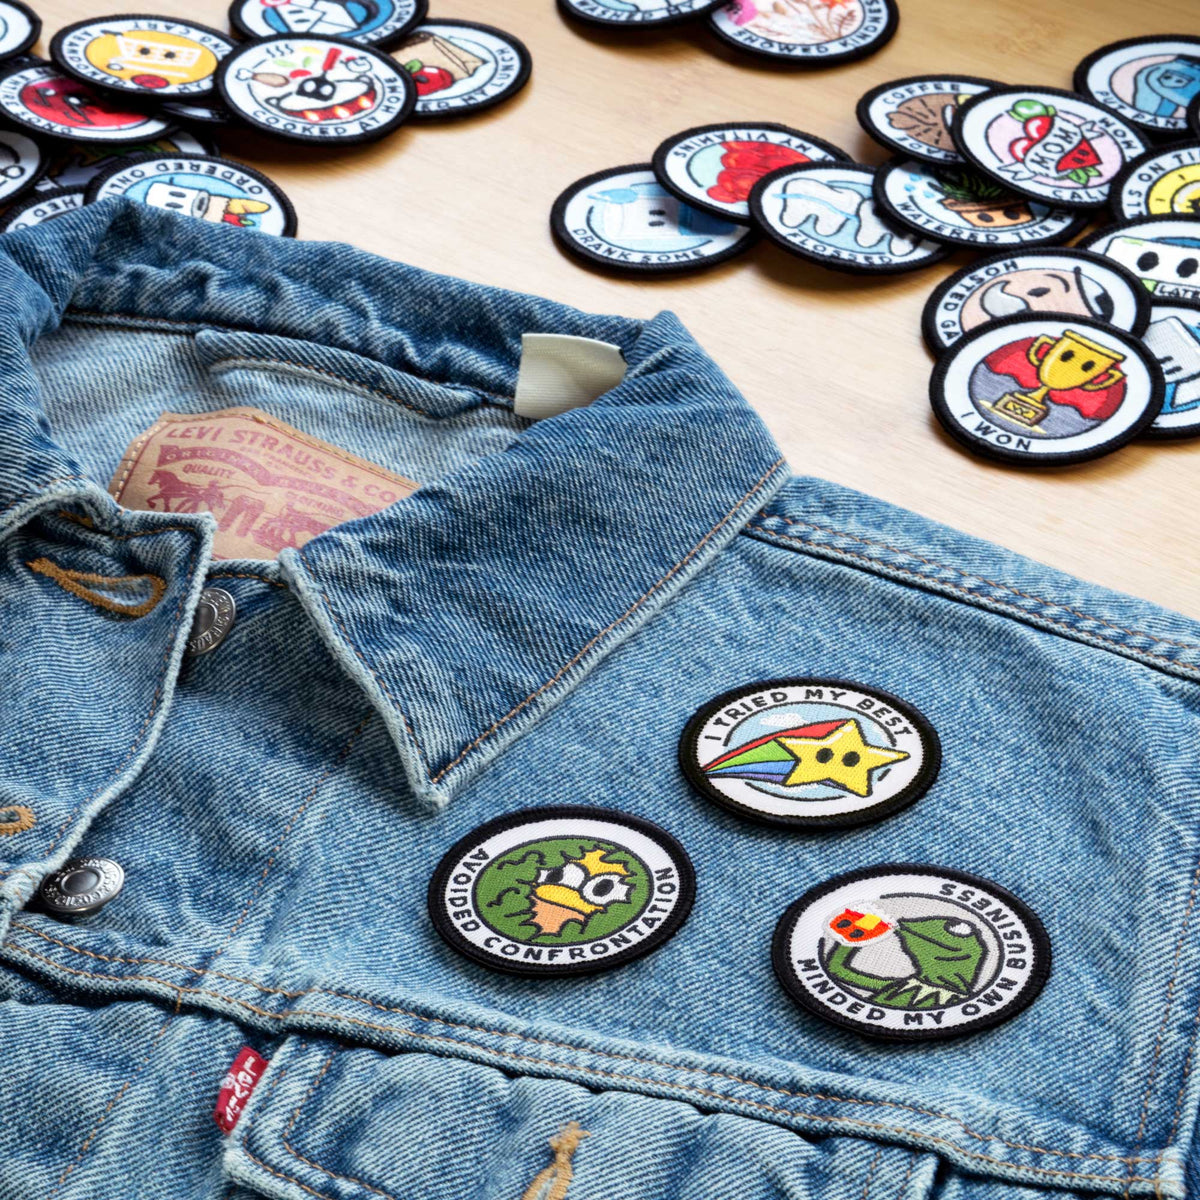 Buy 3 Get 1 Free Patches // Iron on Patch // Cute Patches // Funny